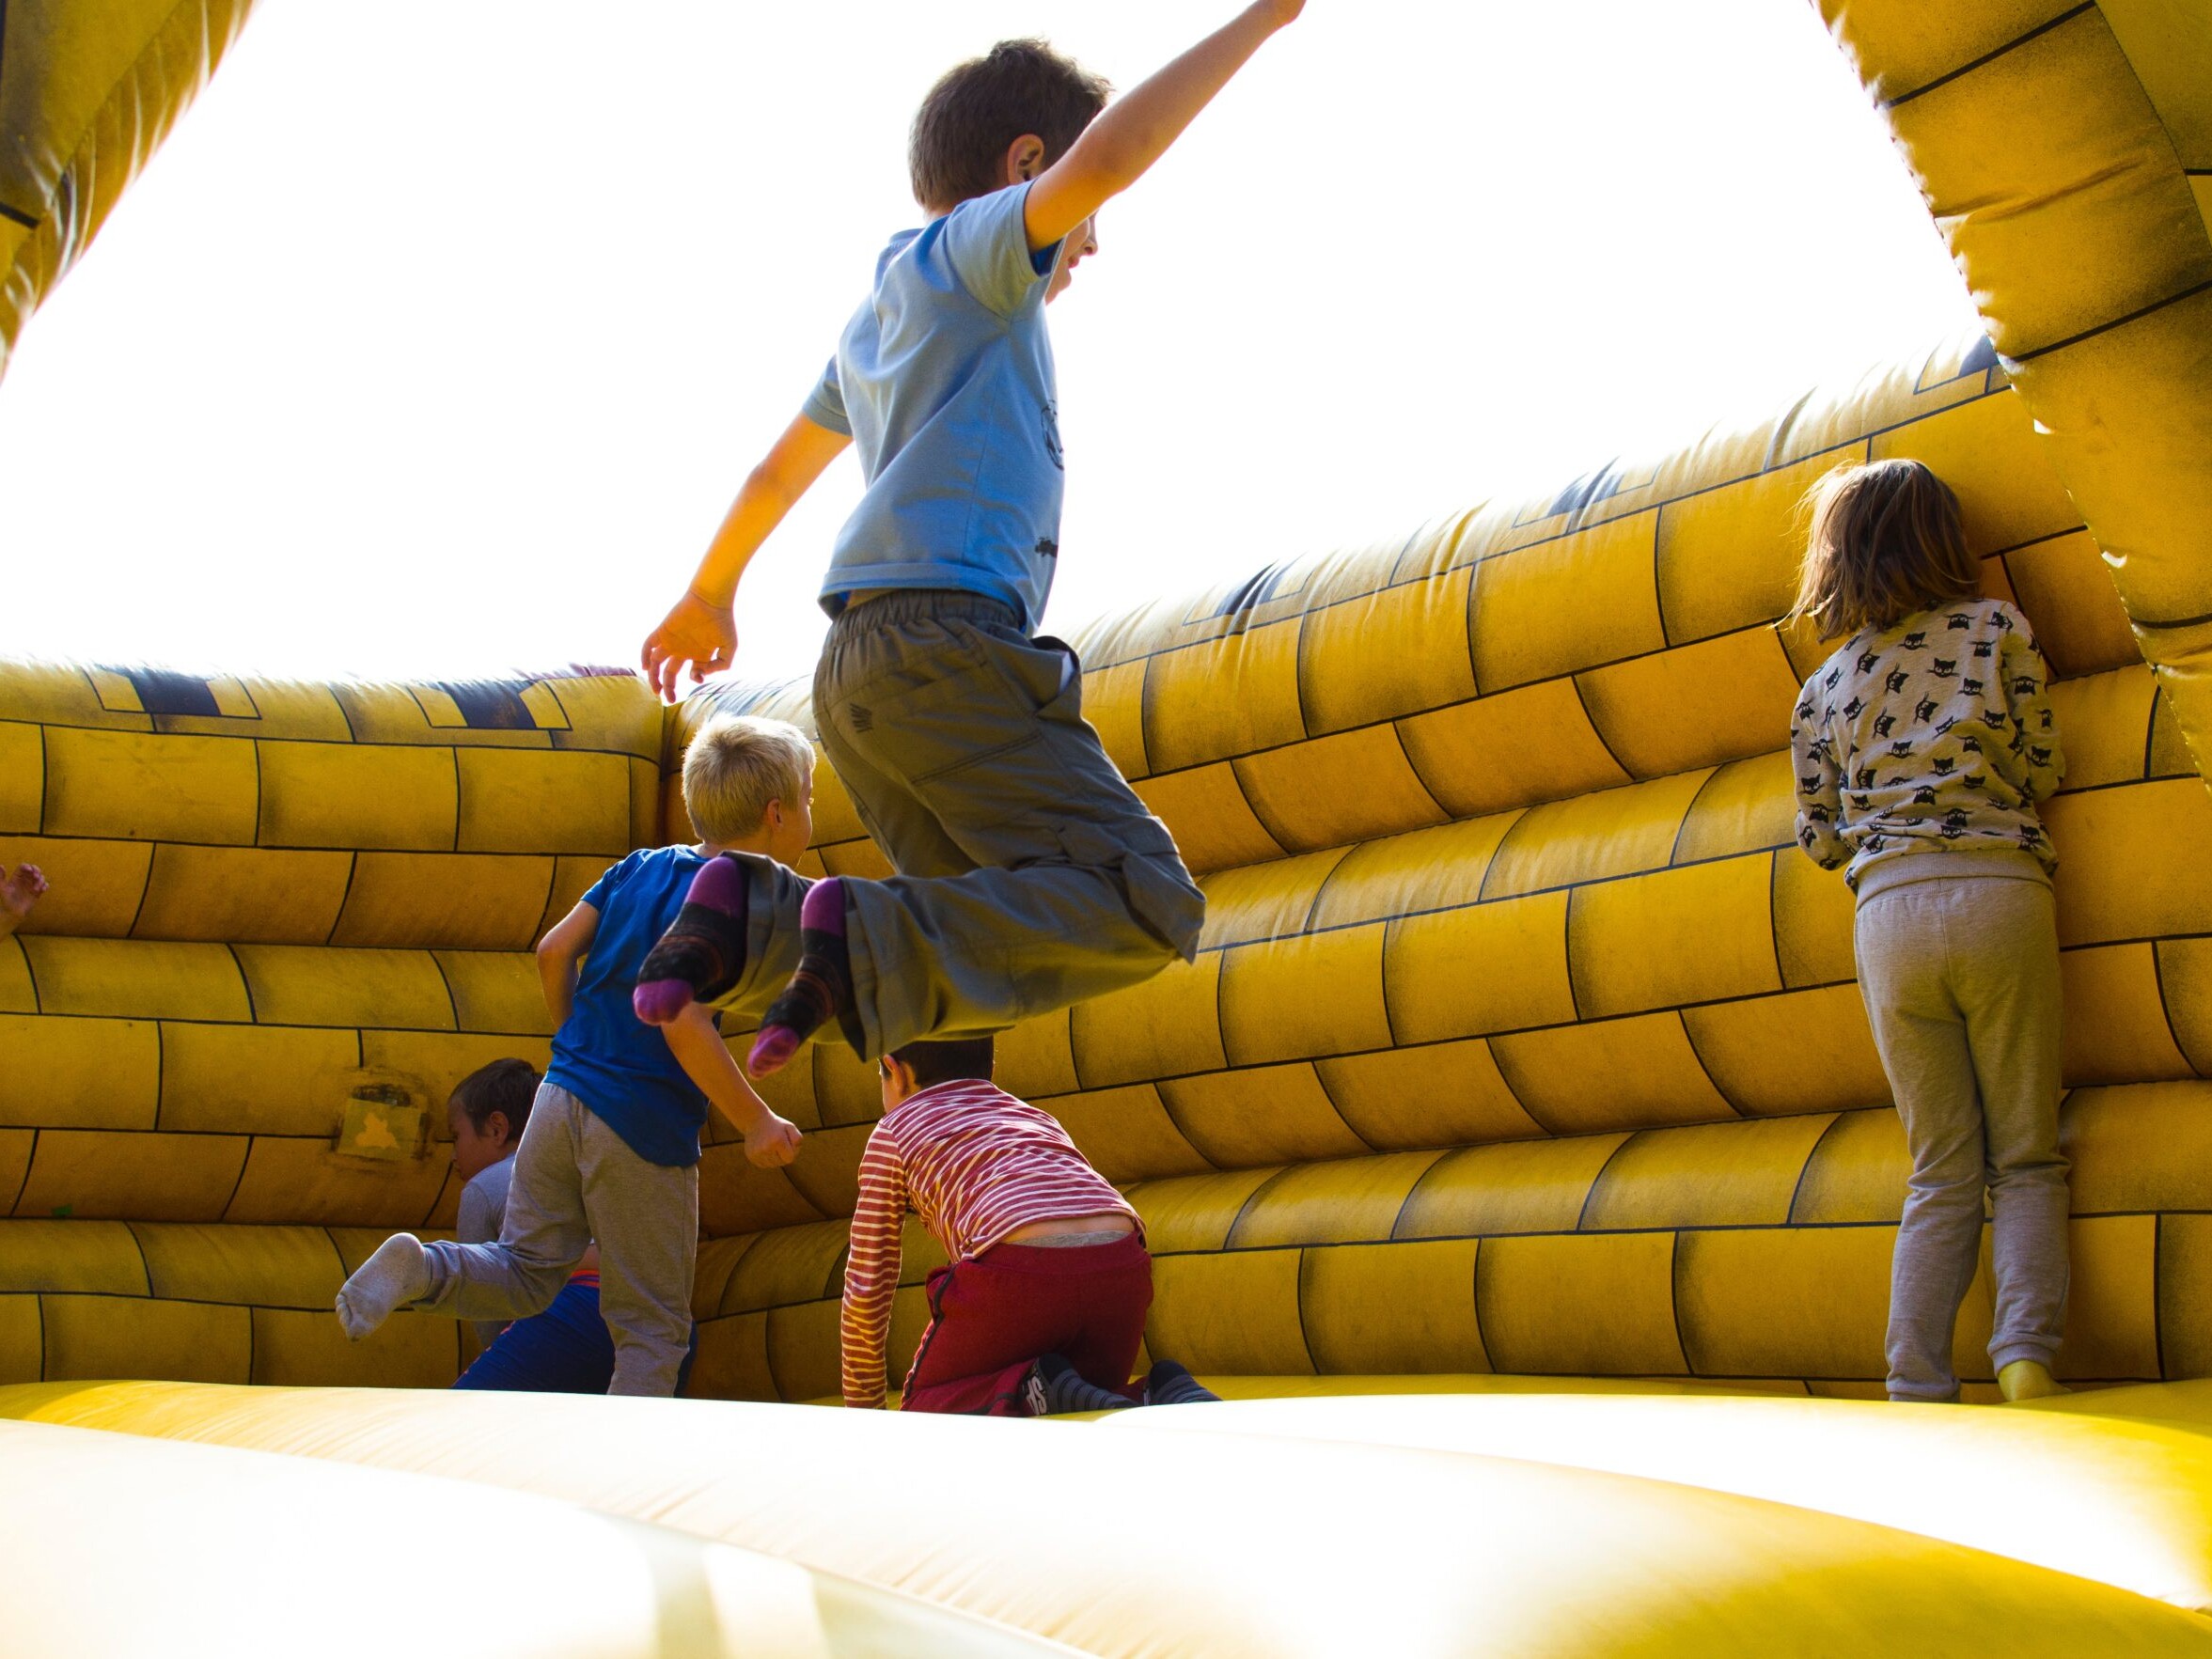 Kids jumping and having fun in an inflatable attraction.